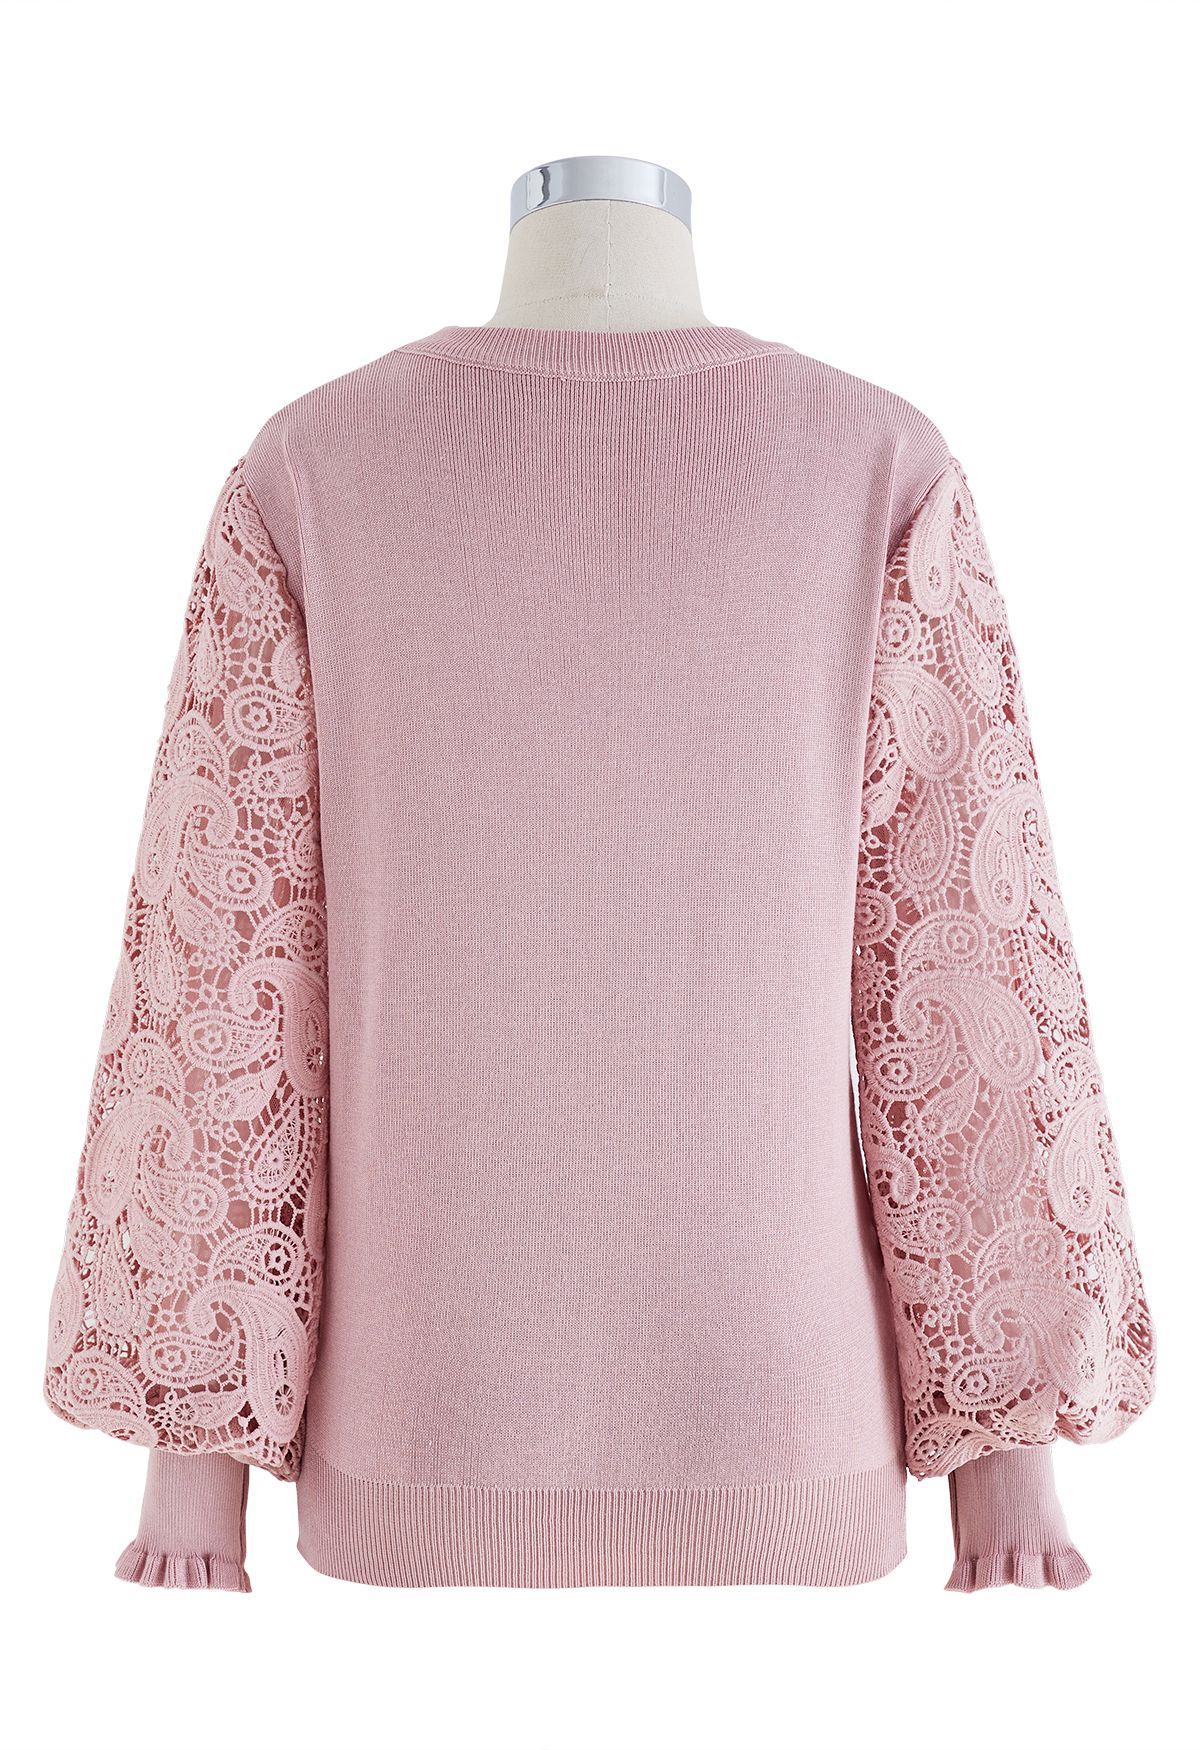 Paisley Crochet Sleeve Knit Top in Pink